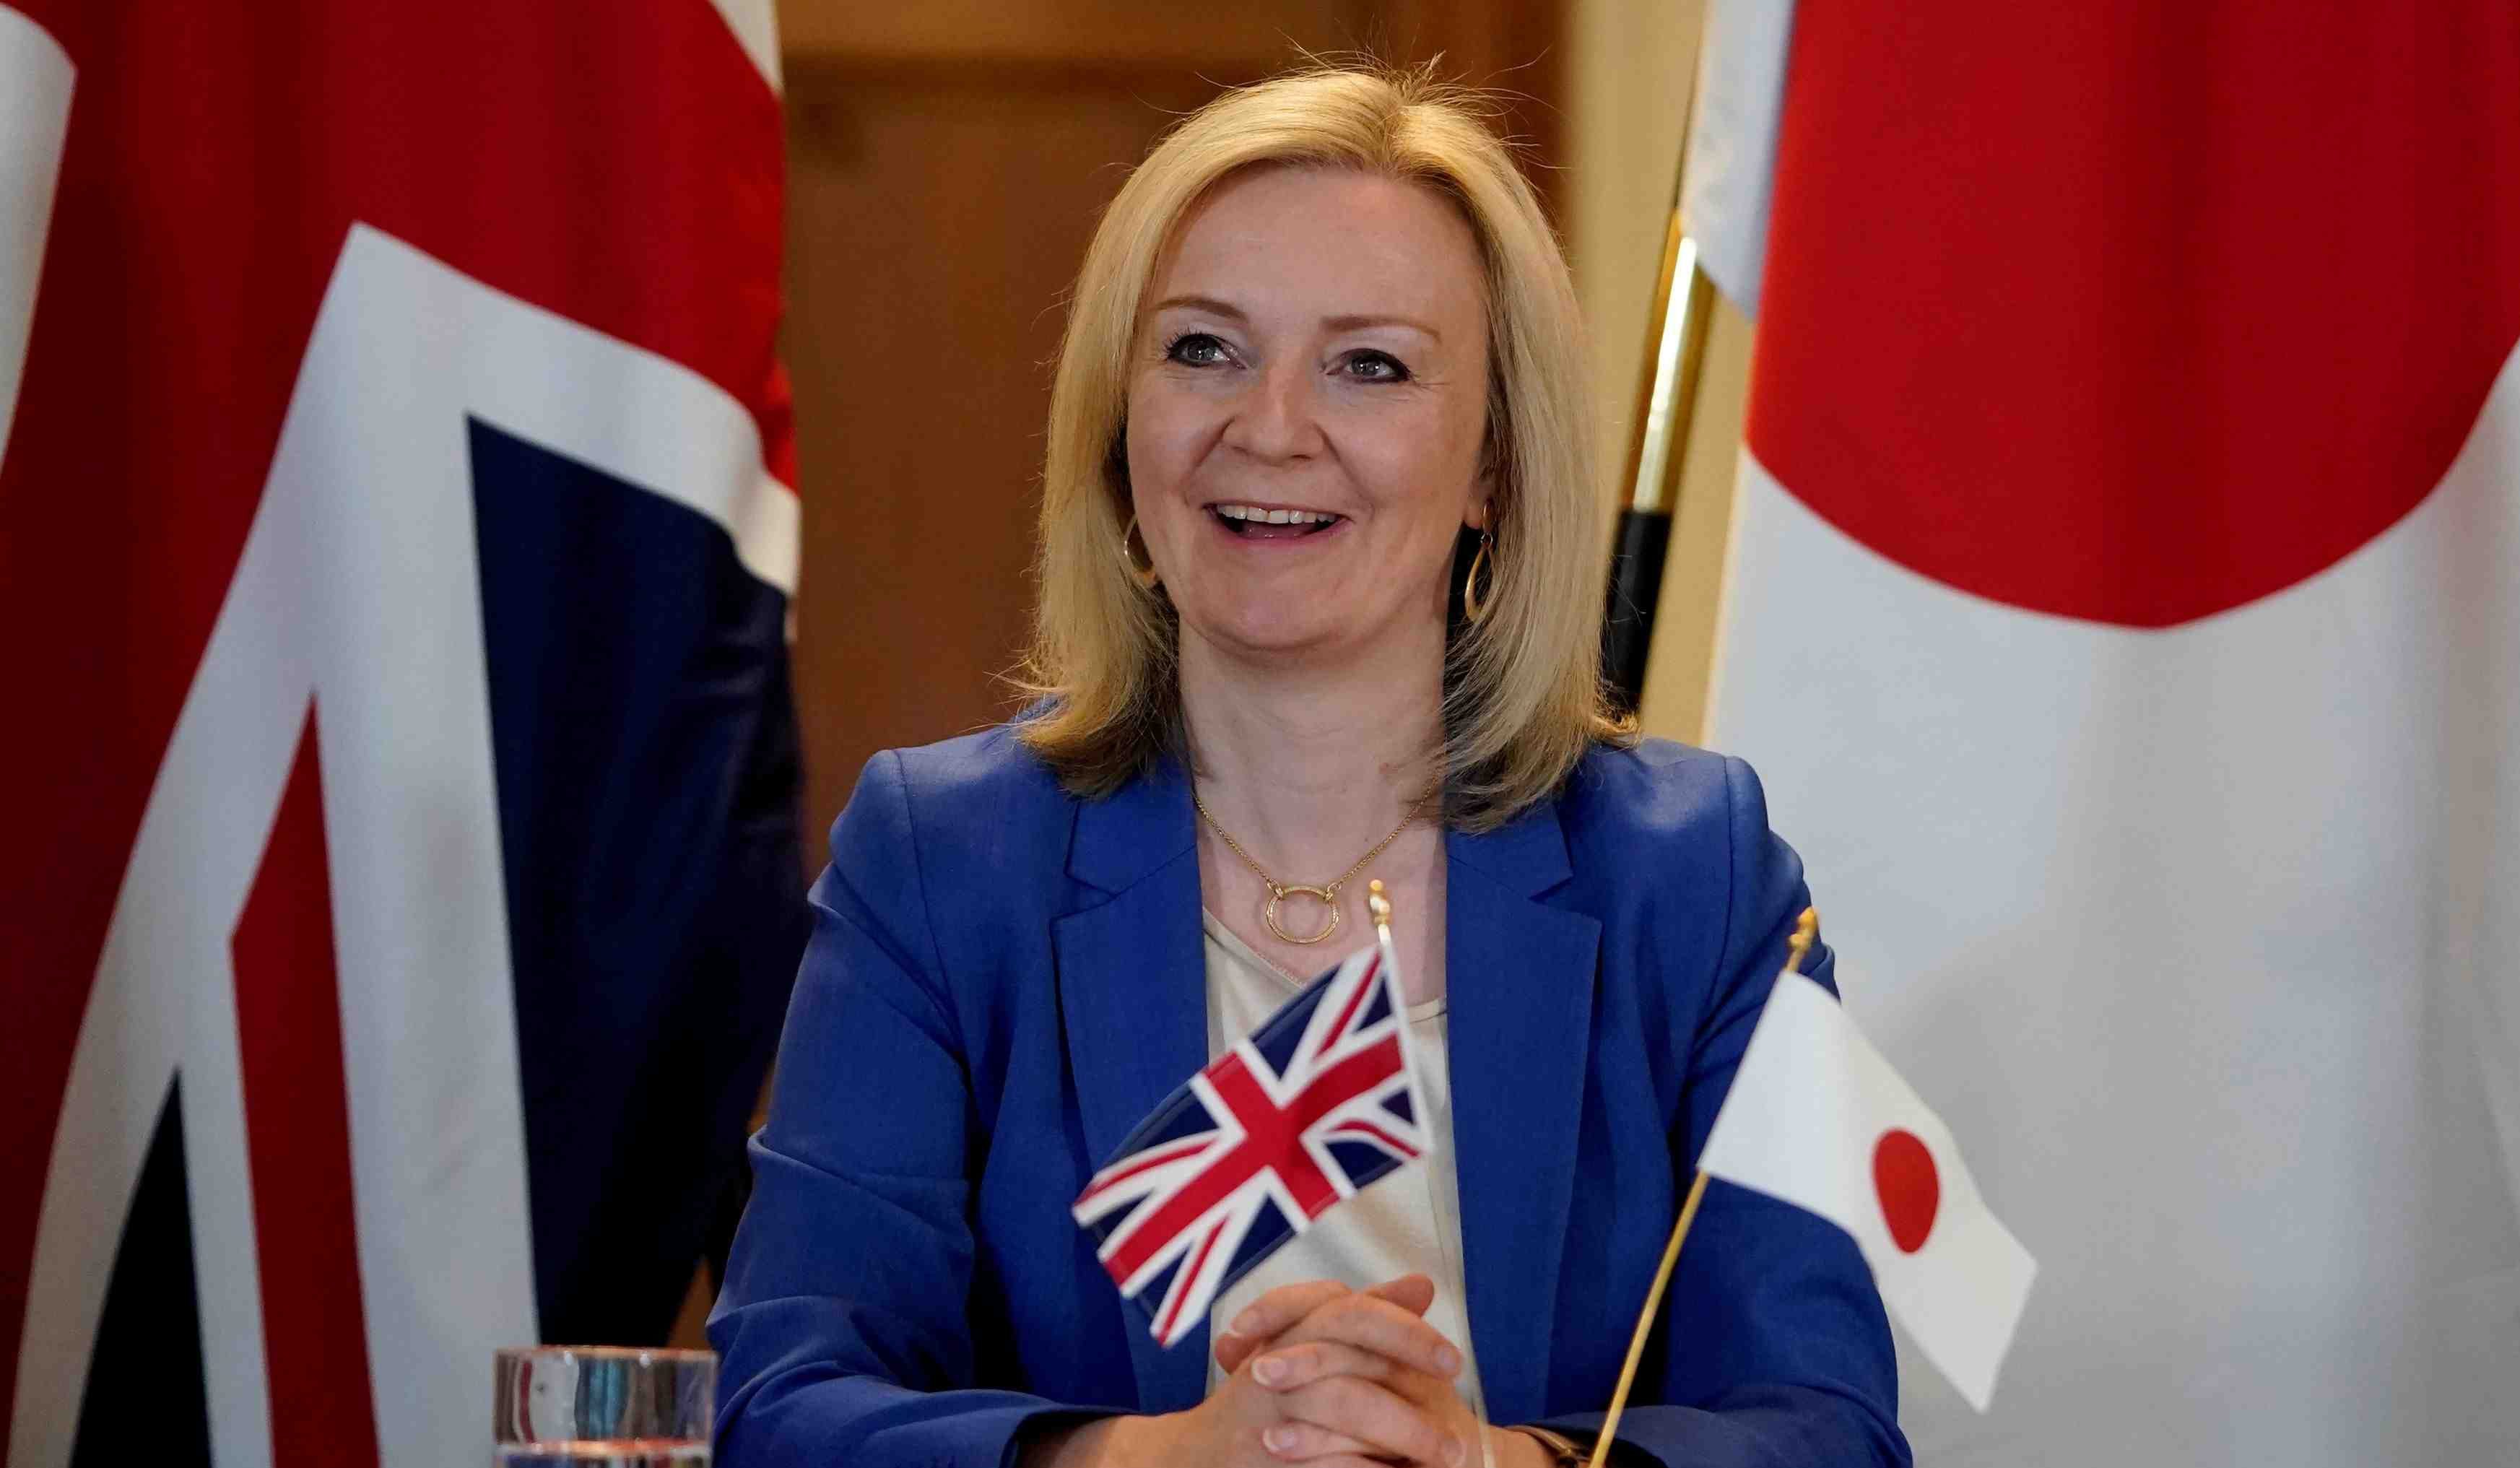 Britain's Secretary of State of International Trade and Minister for Women and Equalities Liz Truss attends a joint videoconference with Japan's Minister for Foreign Affairs Toshimitsu Motegi, in London